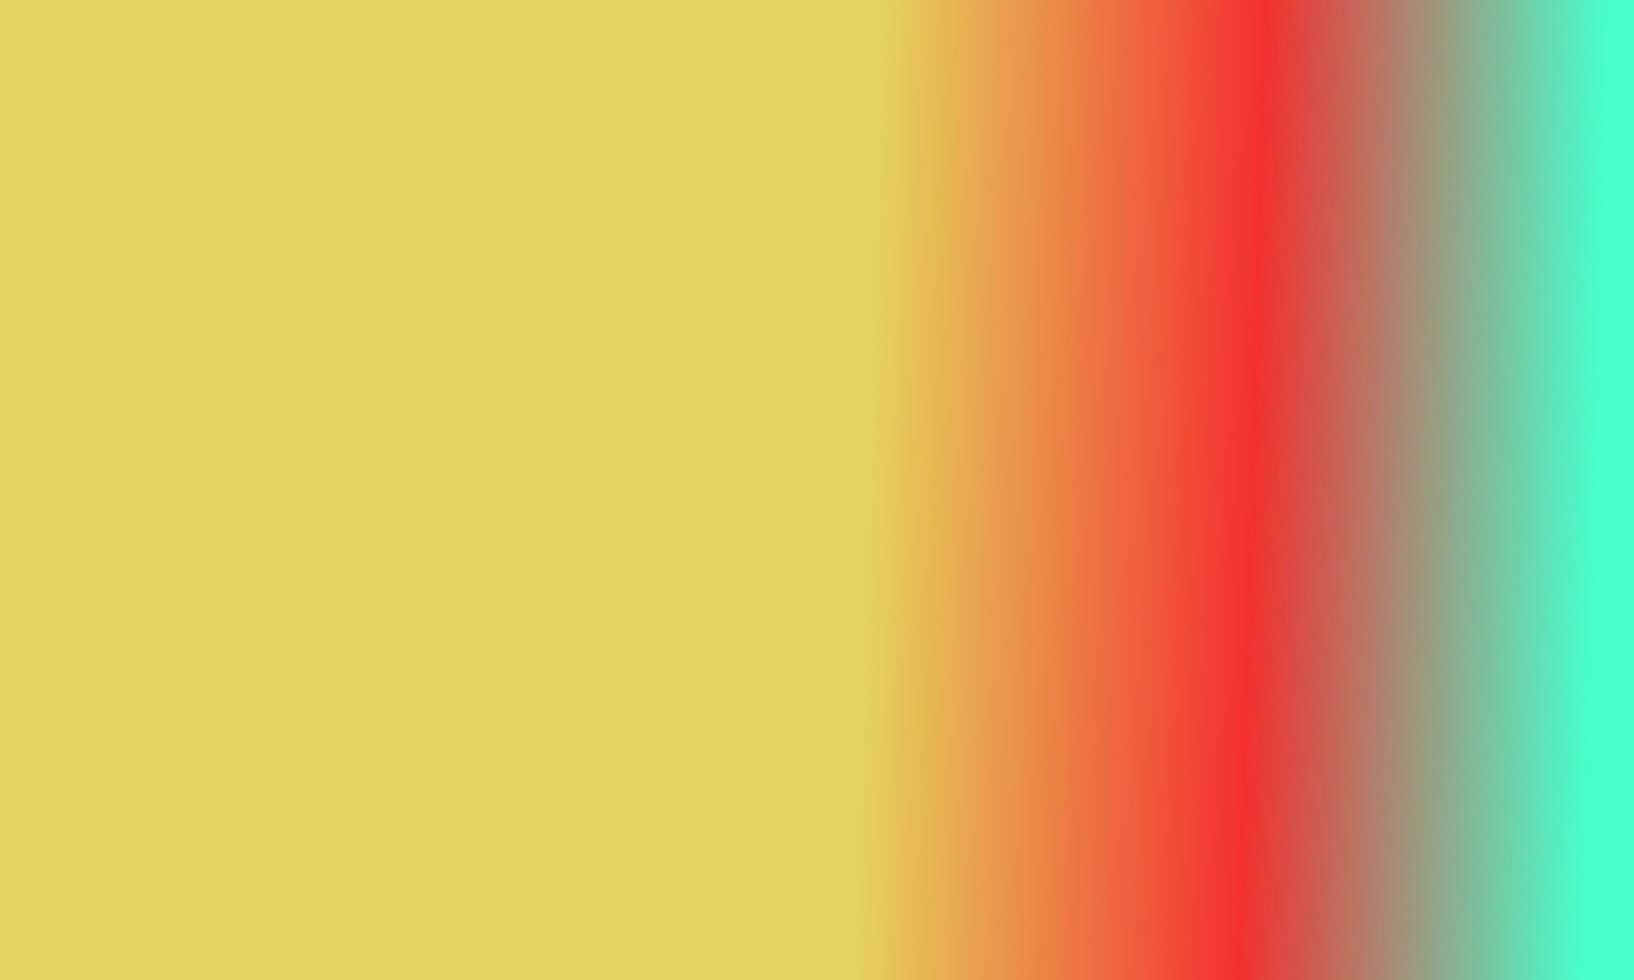 Design simple cyan,red and yellow gradient color illustration background photo